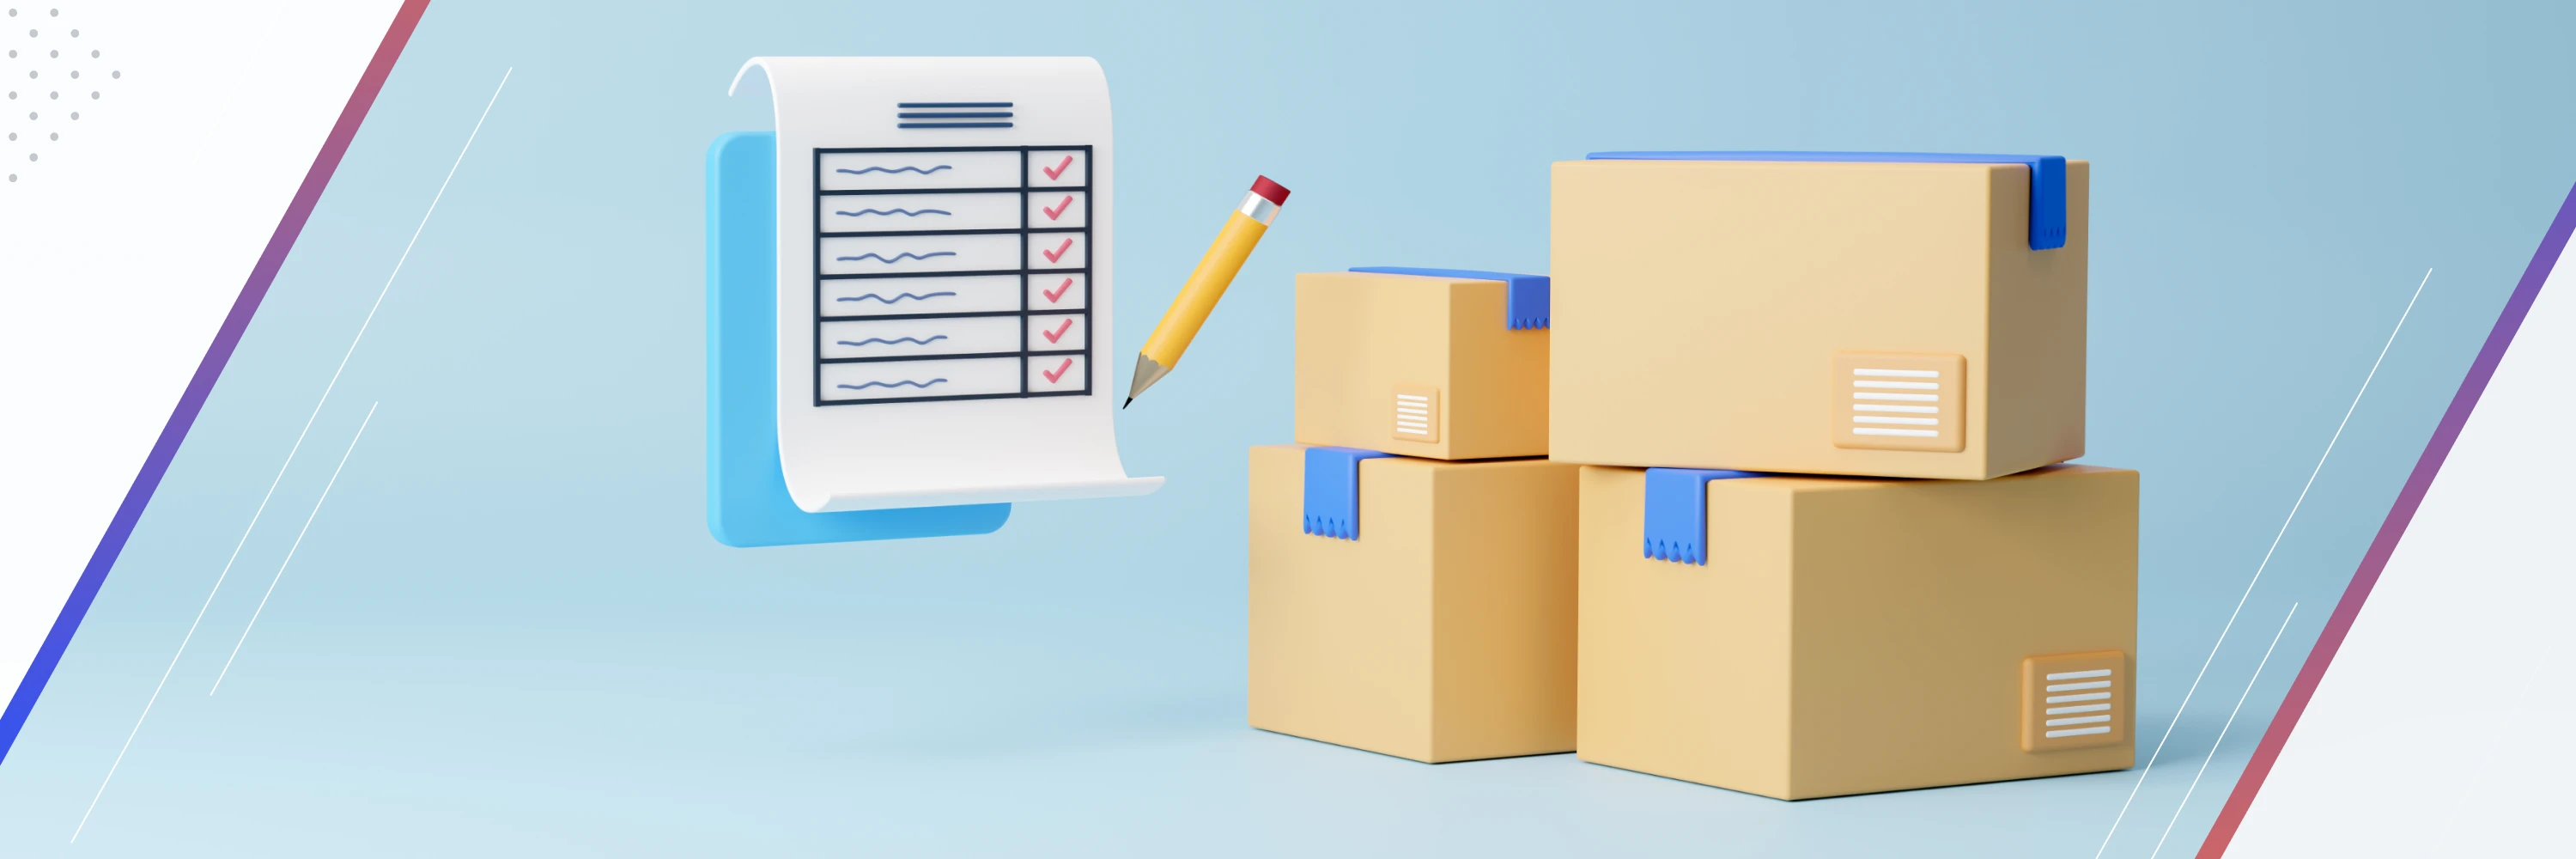 4 Benefits of Inventory Management Automation for Growing Sellers